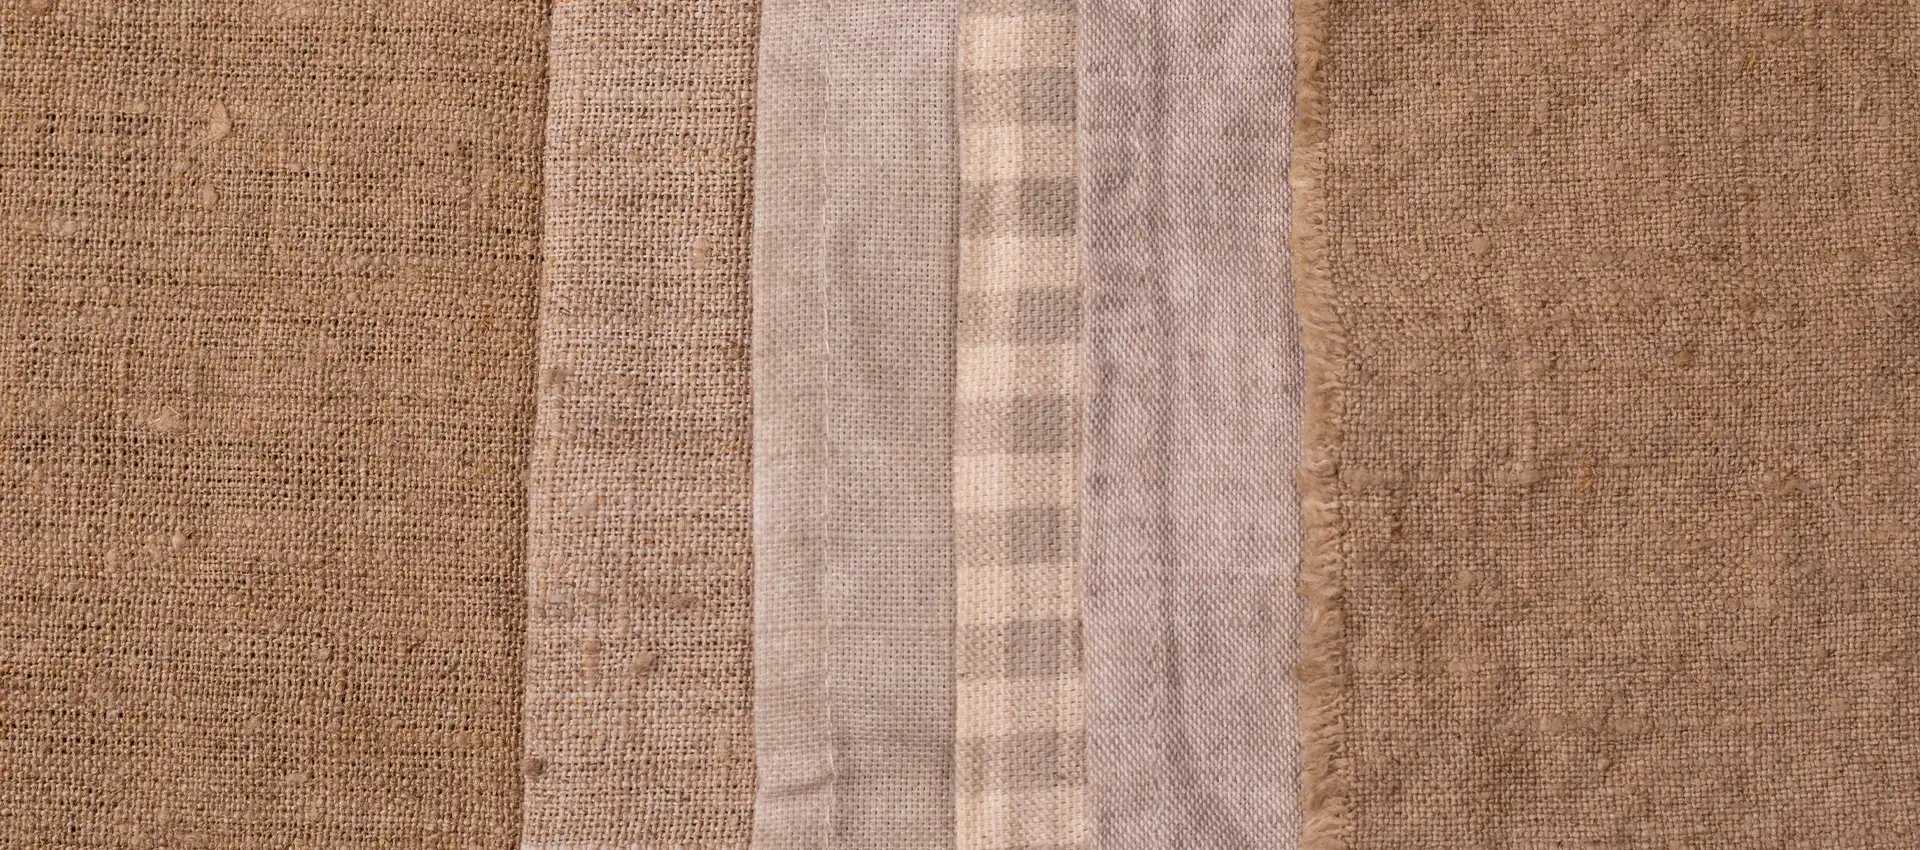 Linen Fabric, History of Linen, Process of making Linen, Linen uses and properties, where linen fabric is produced, Price of linen fabric, Types of Linen Fabric